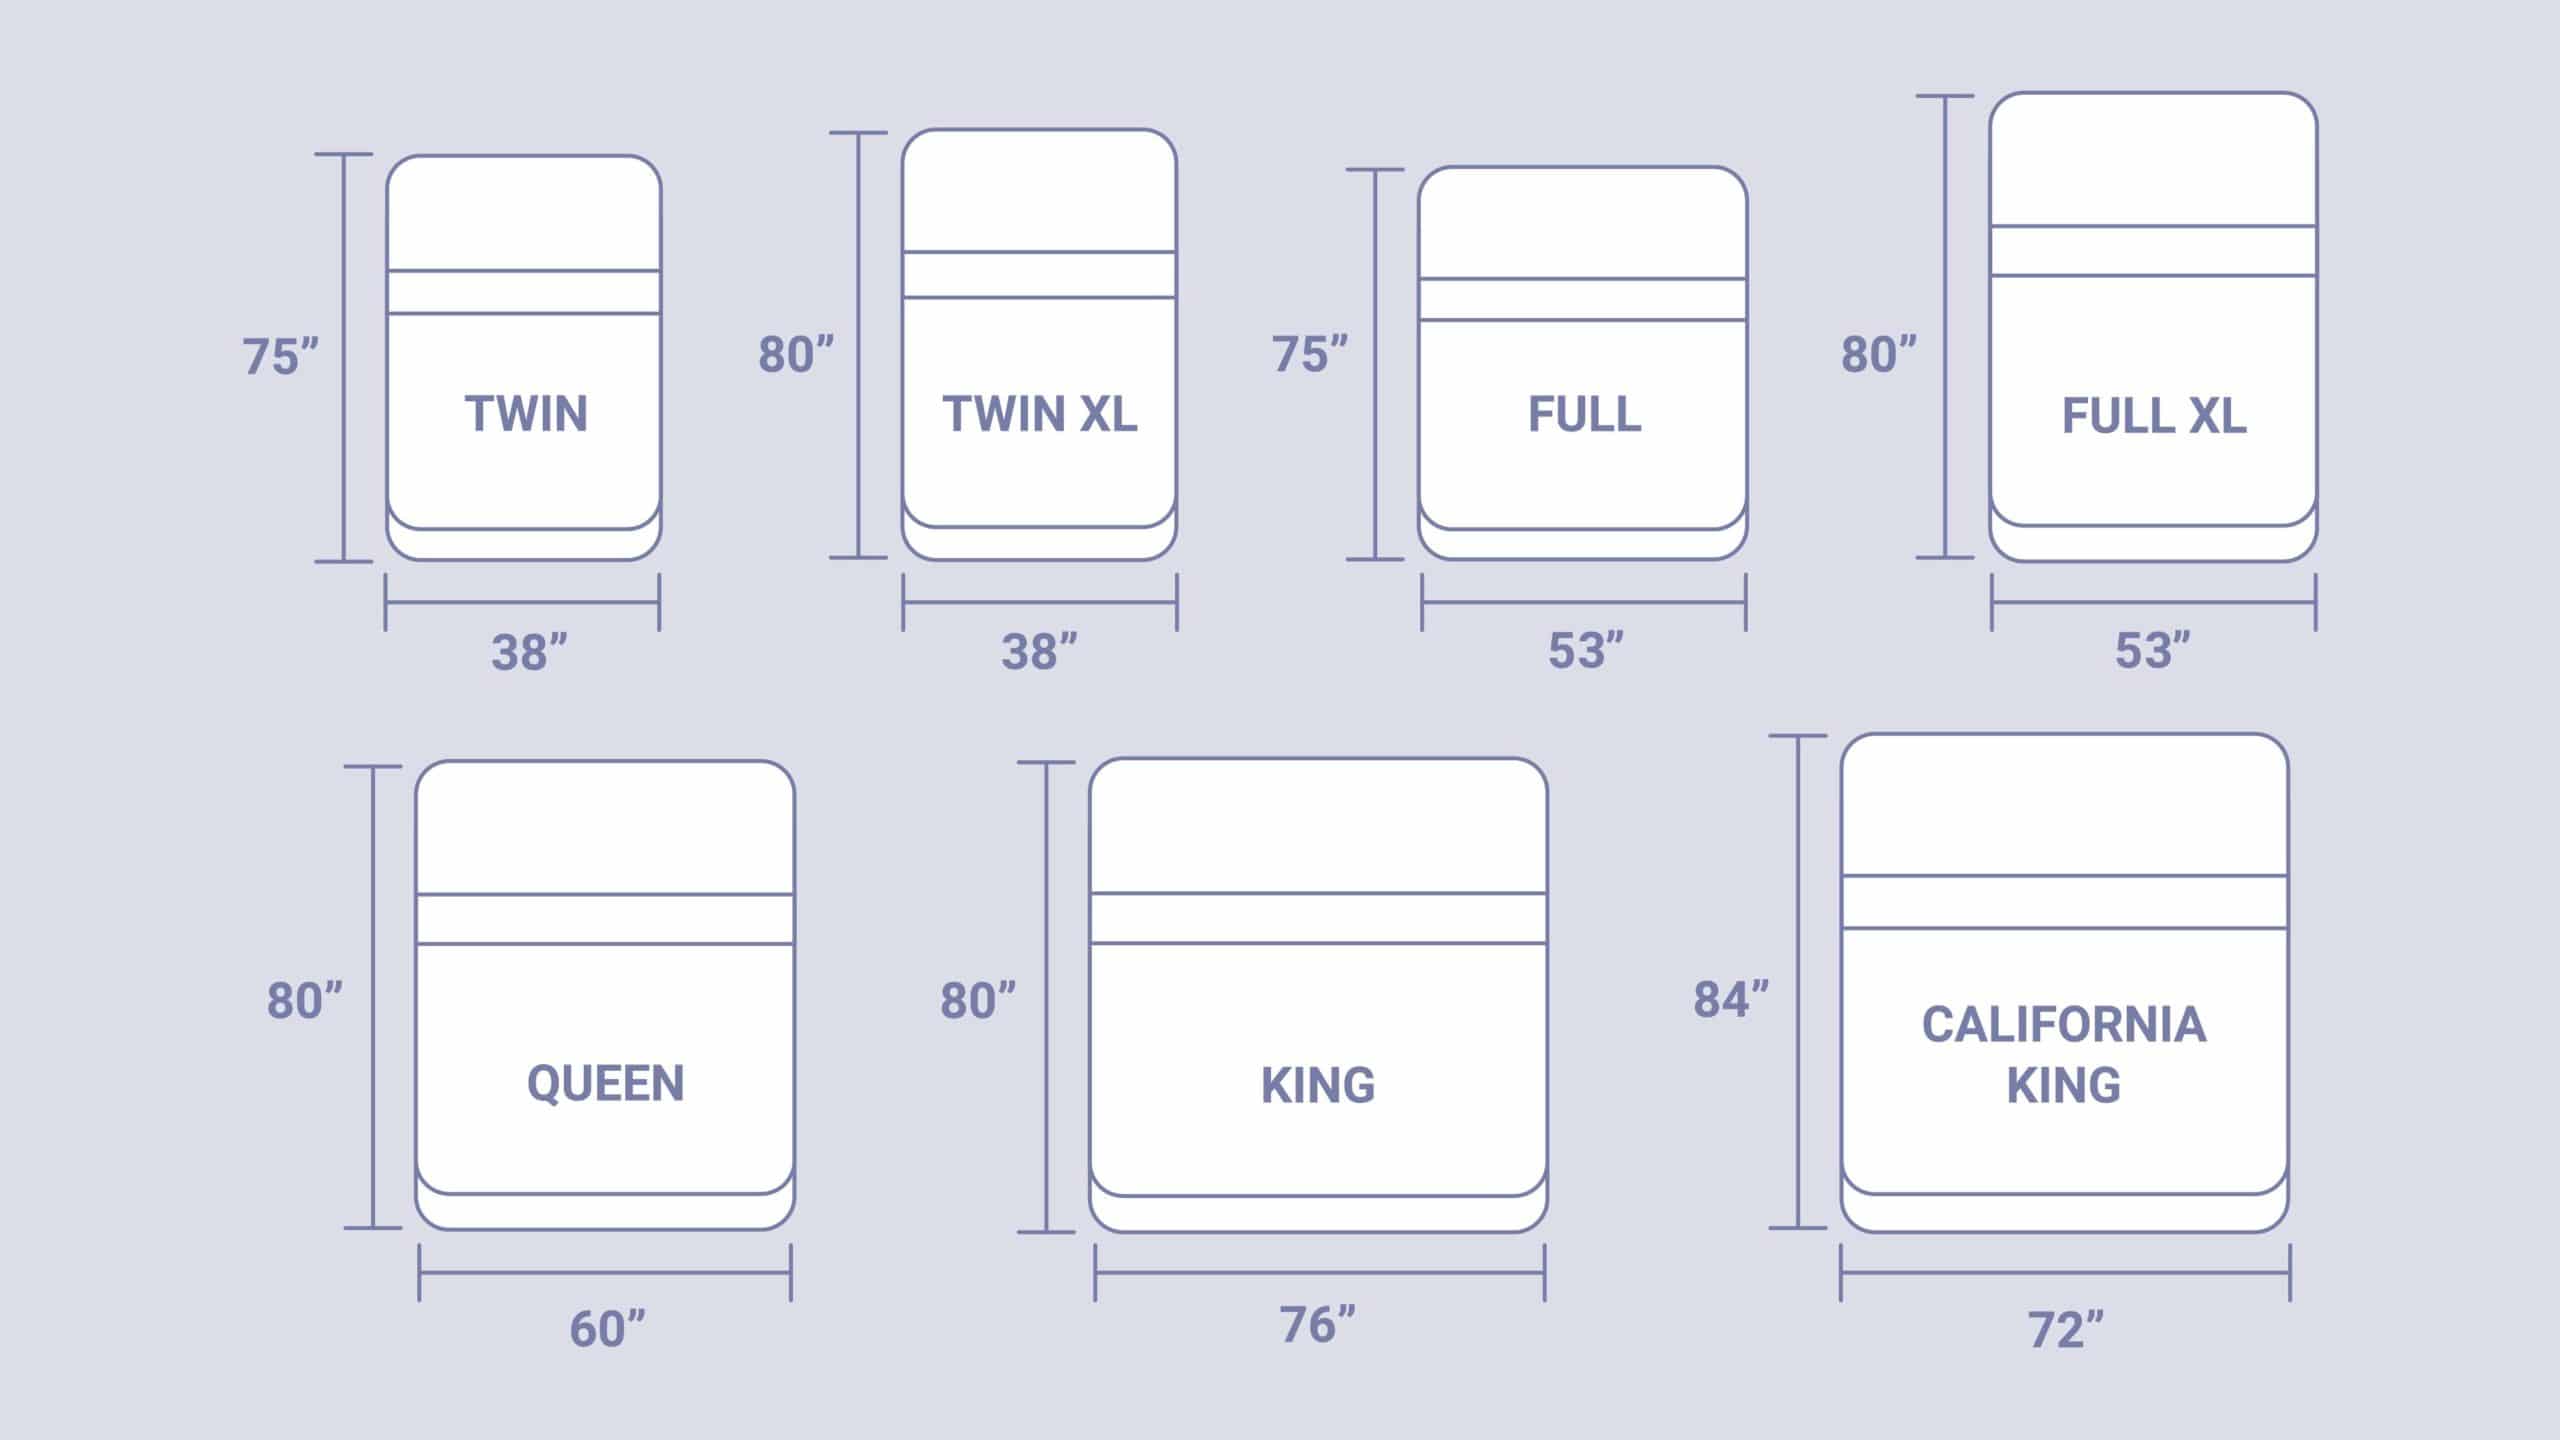 Mattress Sizes And Dimensions Guide, Is There A Bed Wider Than King